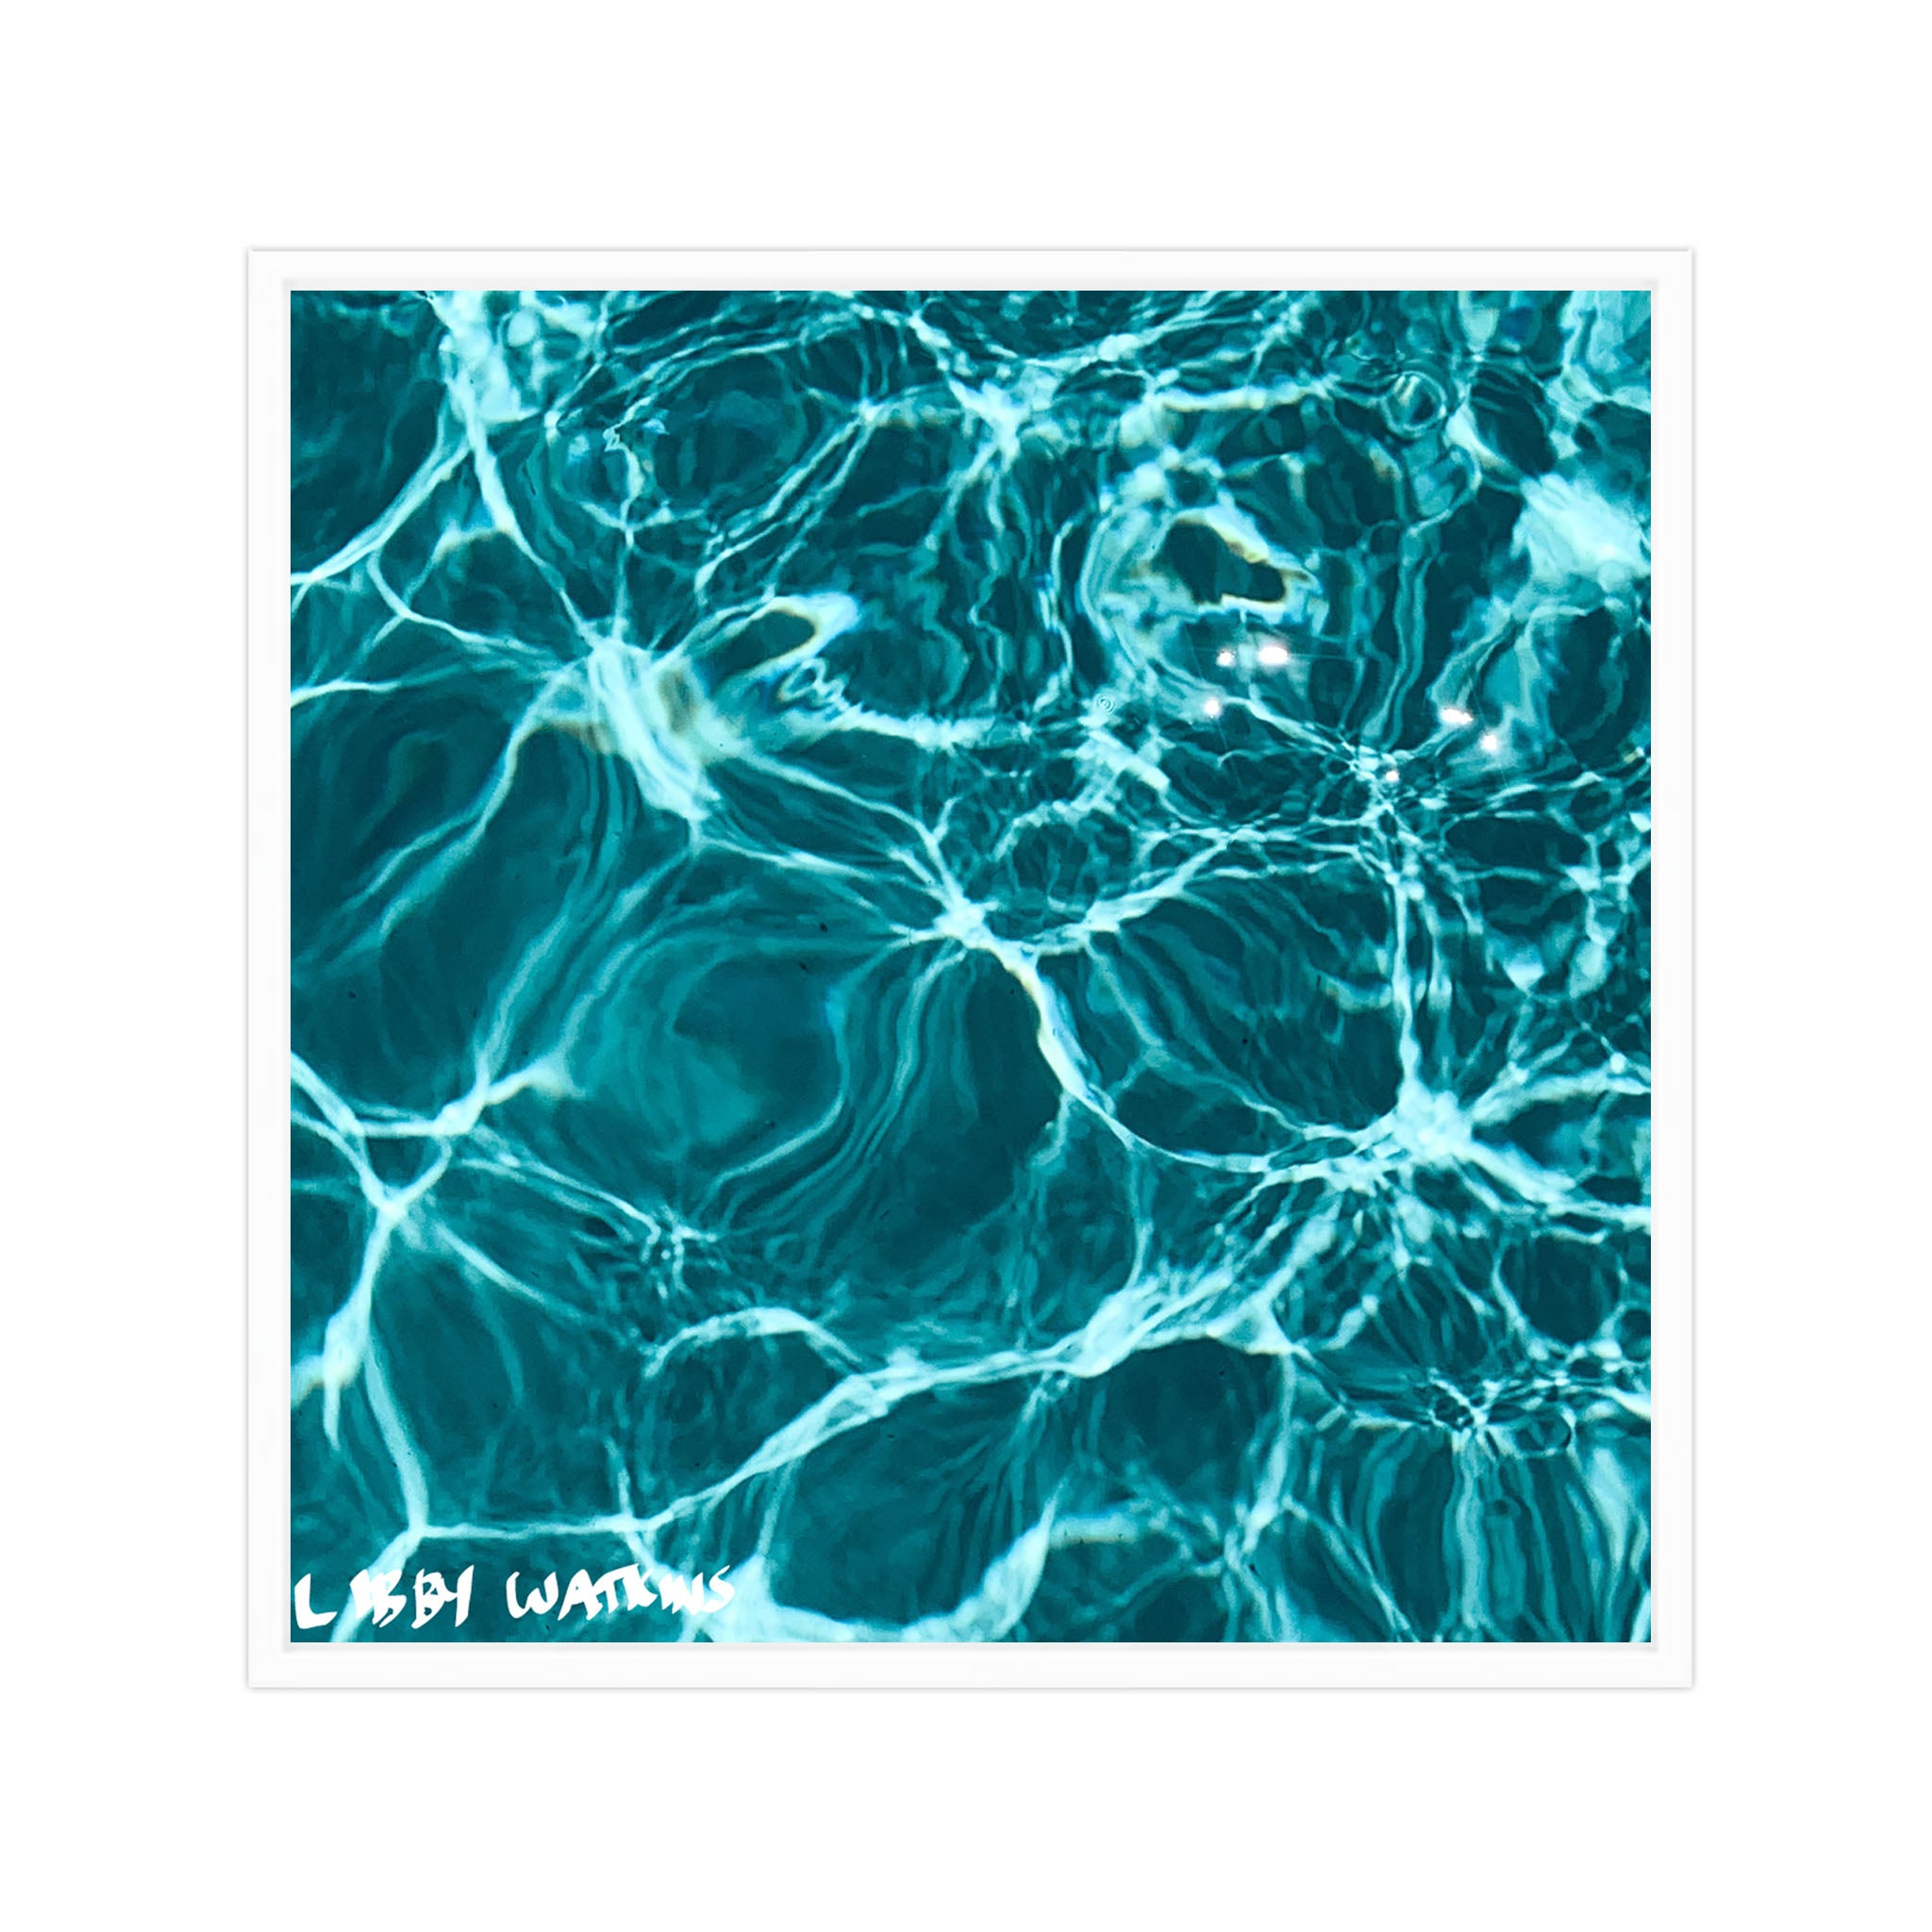 Poolside Reflections Canvas Print